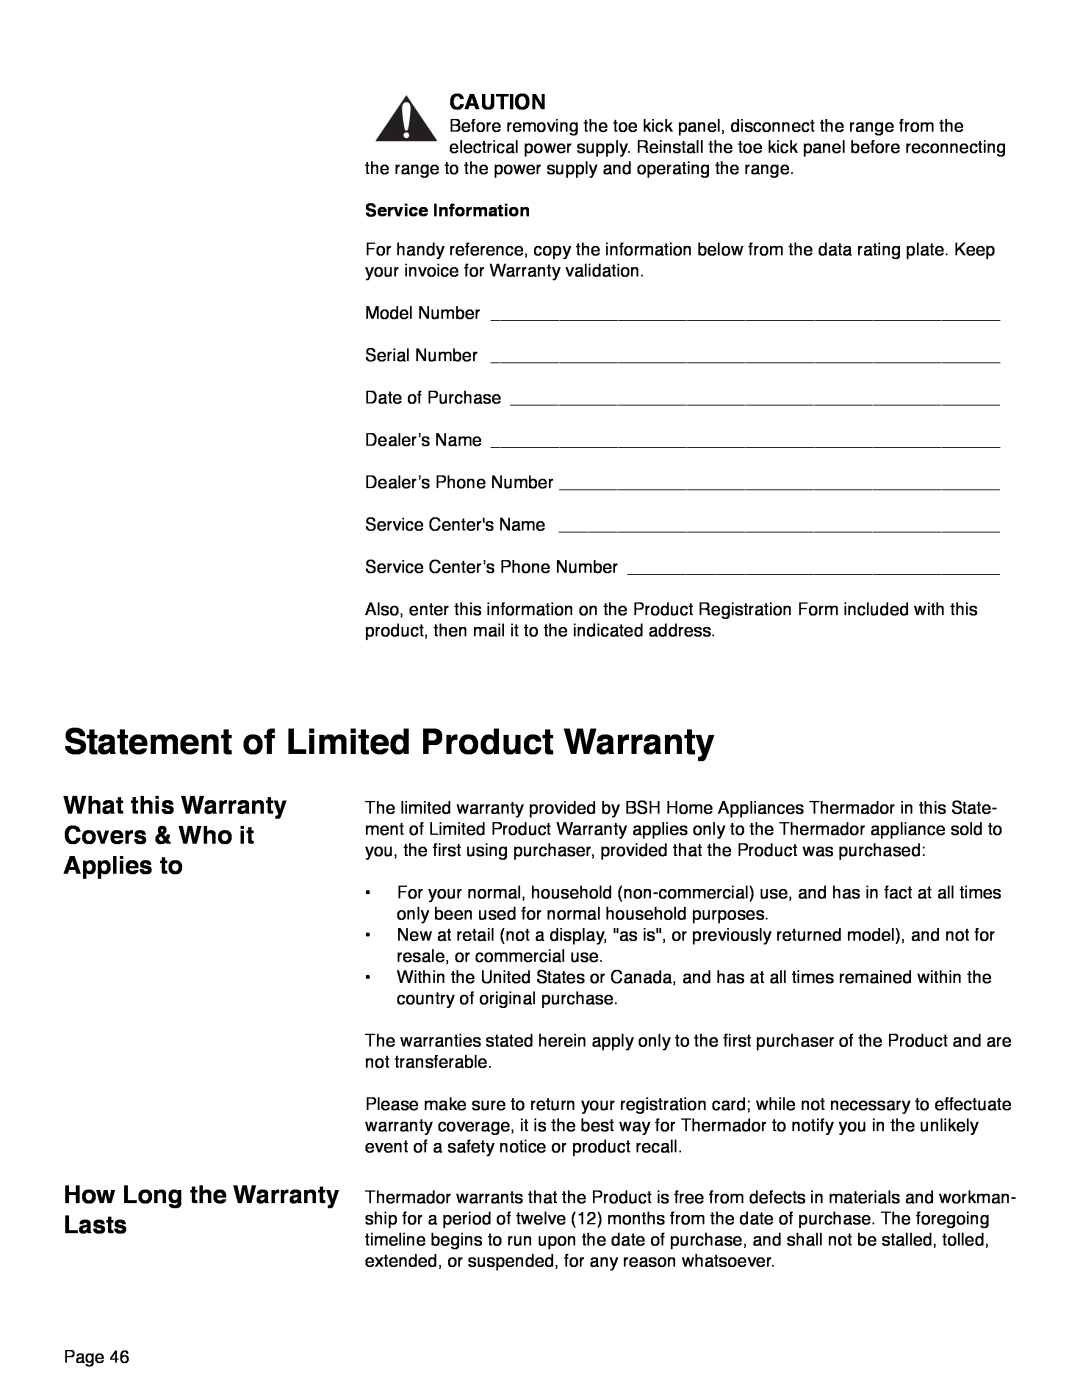 Thermador PRD36, PRD48, PRD30 manual Statement of Limited Product Warranty, What this Warranty Covers & Who it Applies to 